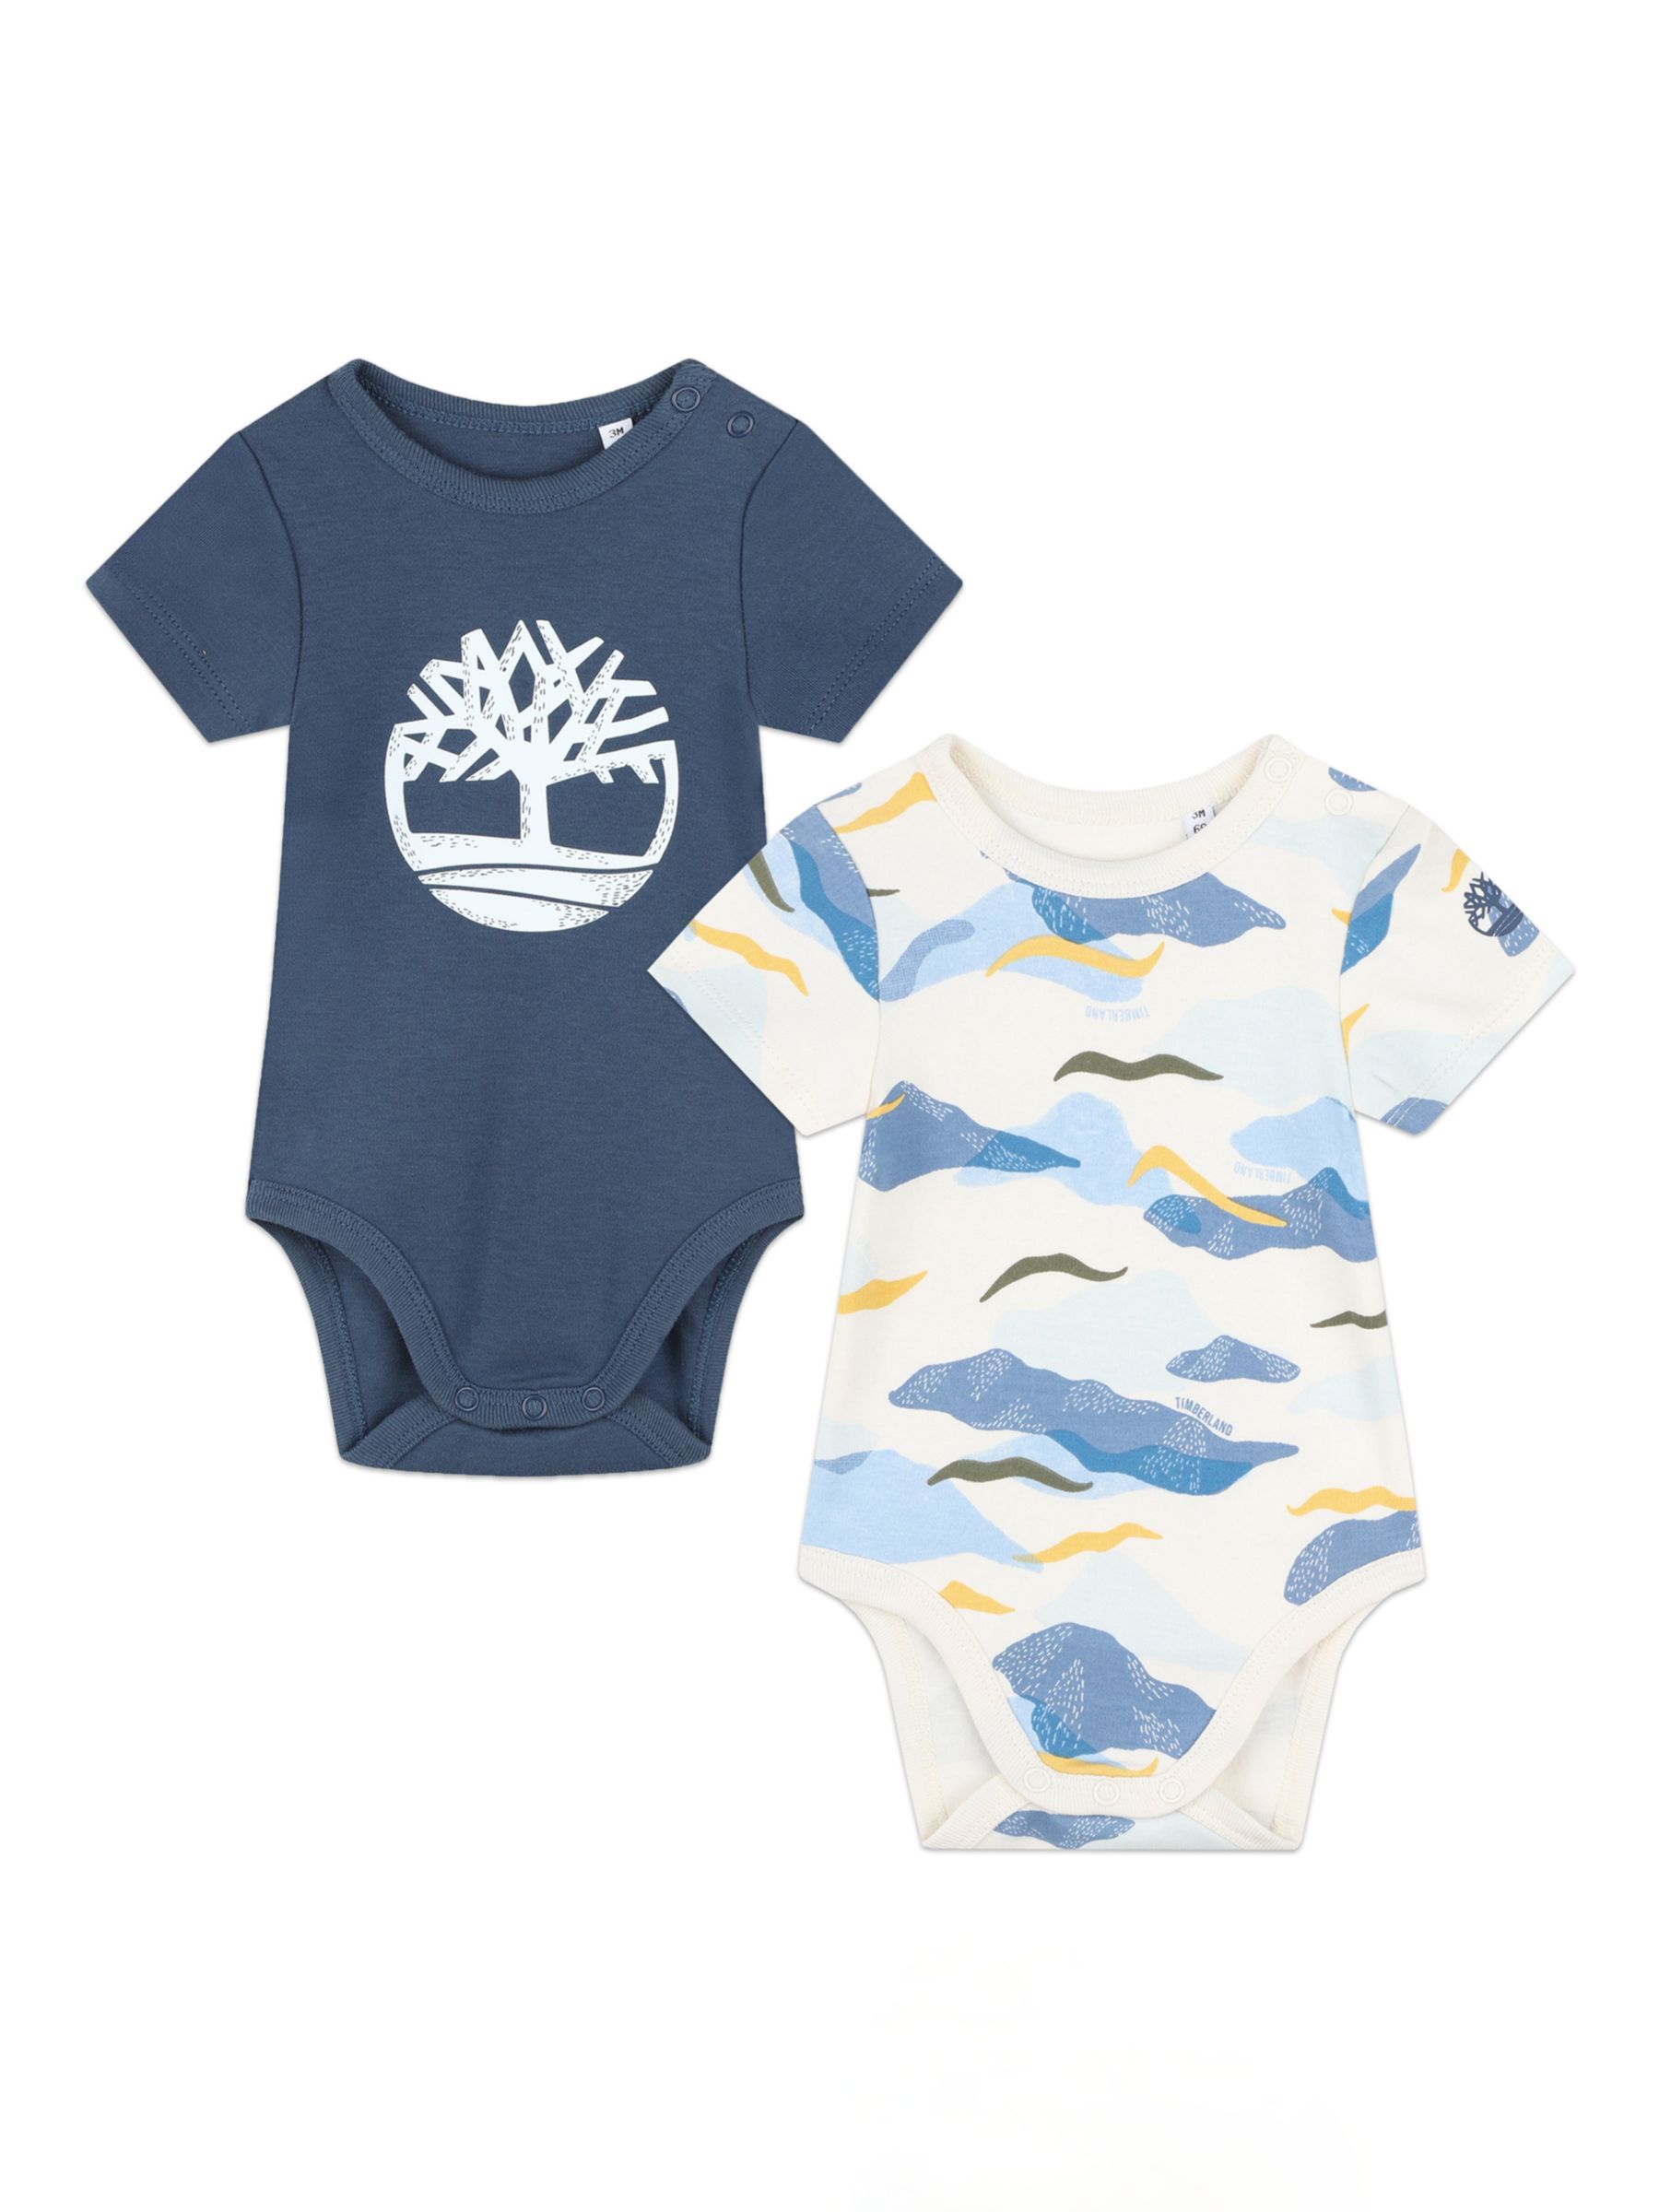 Timberland Baby Logo & Abstract Print Bodysuits, Pack Of 2, Blue/Multi, 3 months